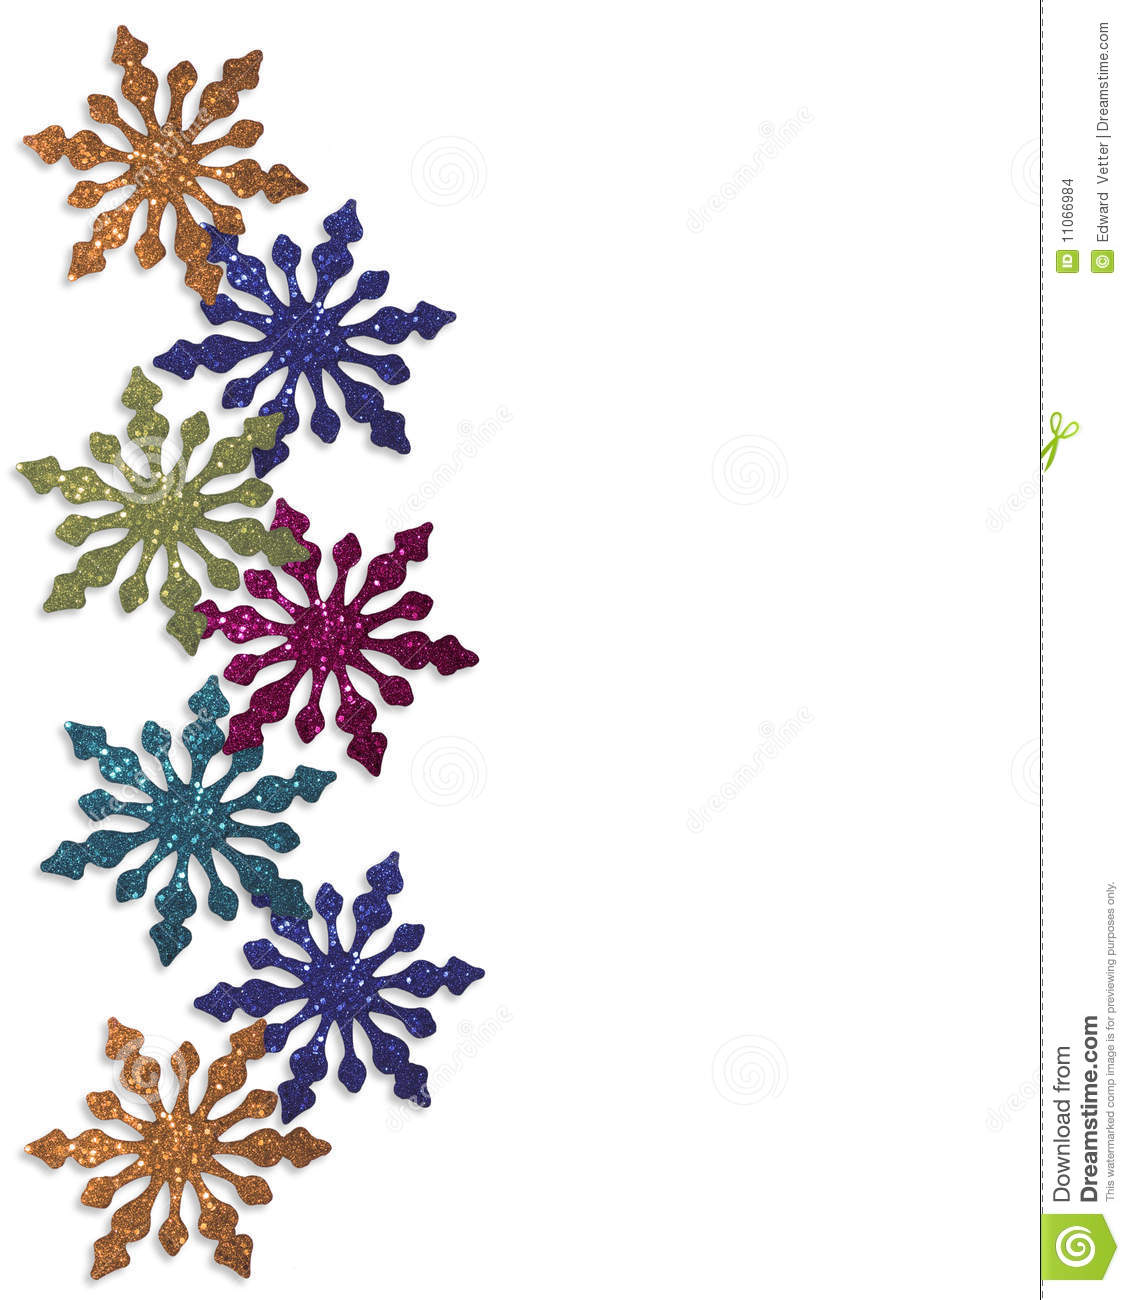 Christmas Design With Colorful Snowflakes Ornaments For Christmas